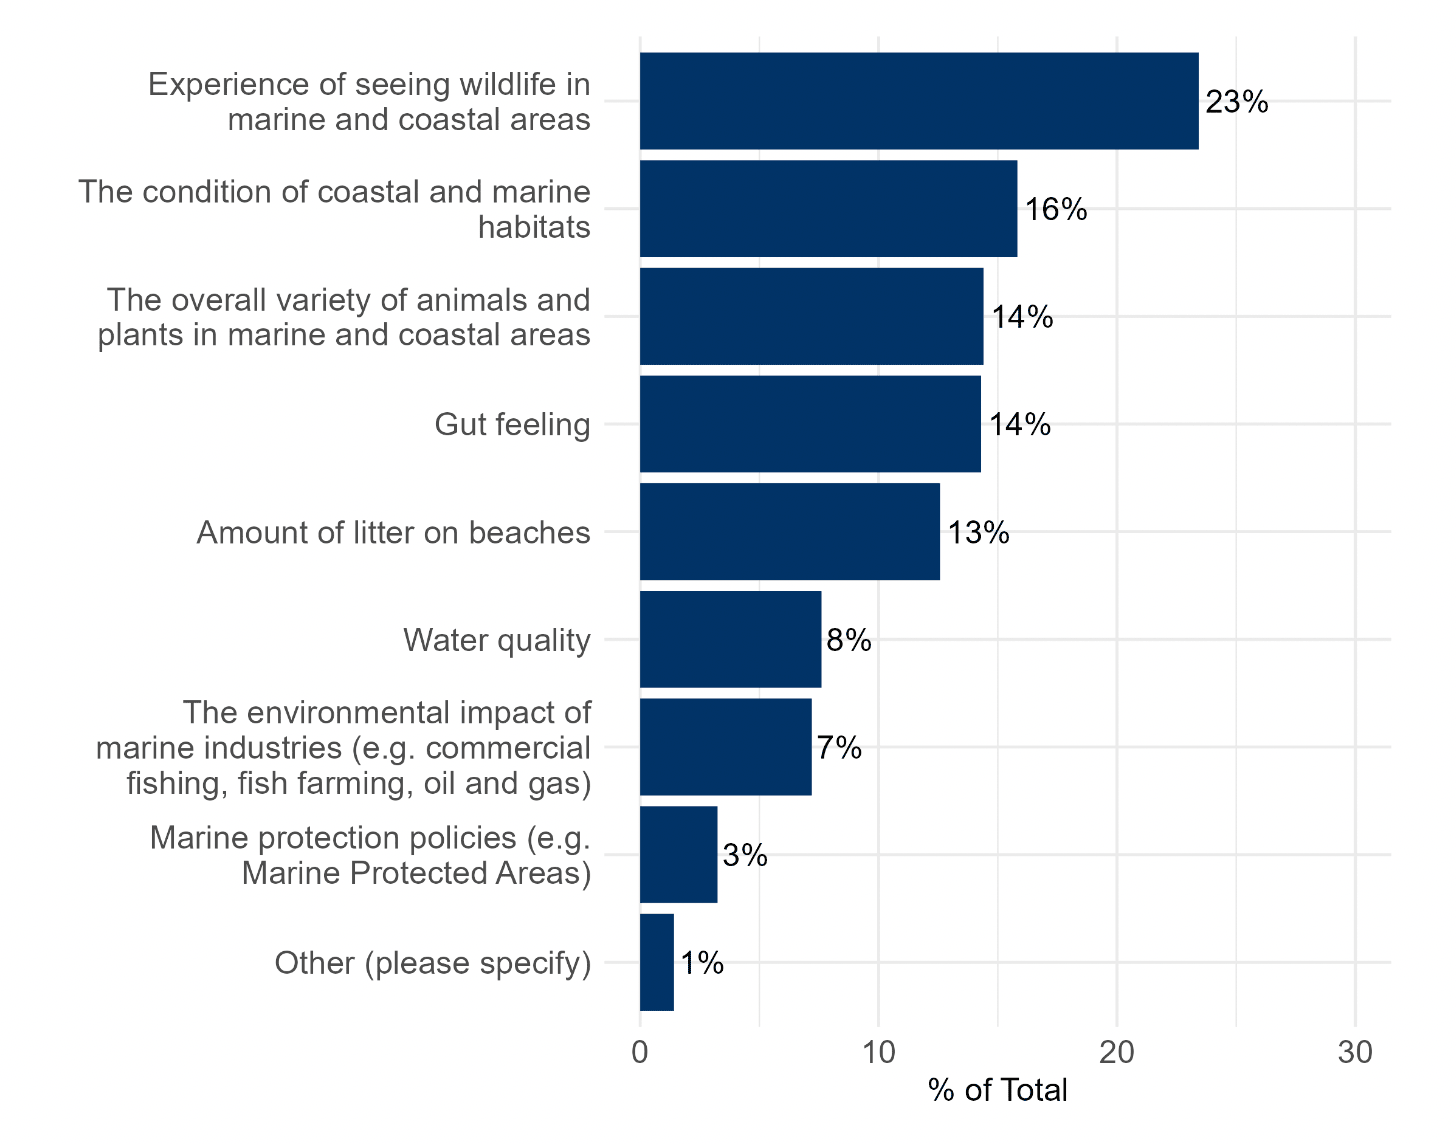 Bar chart showing what respondent's said they were thinking about the most to previous question. Chart shows 'experience of seeing wildlife in marine and coastal areas' most popular option.